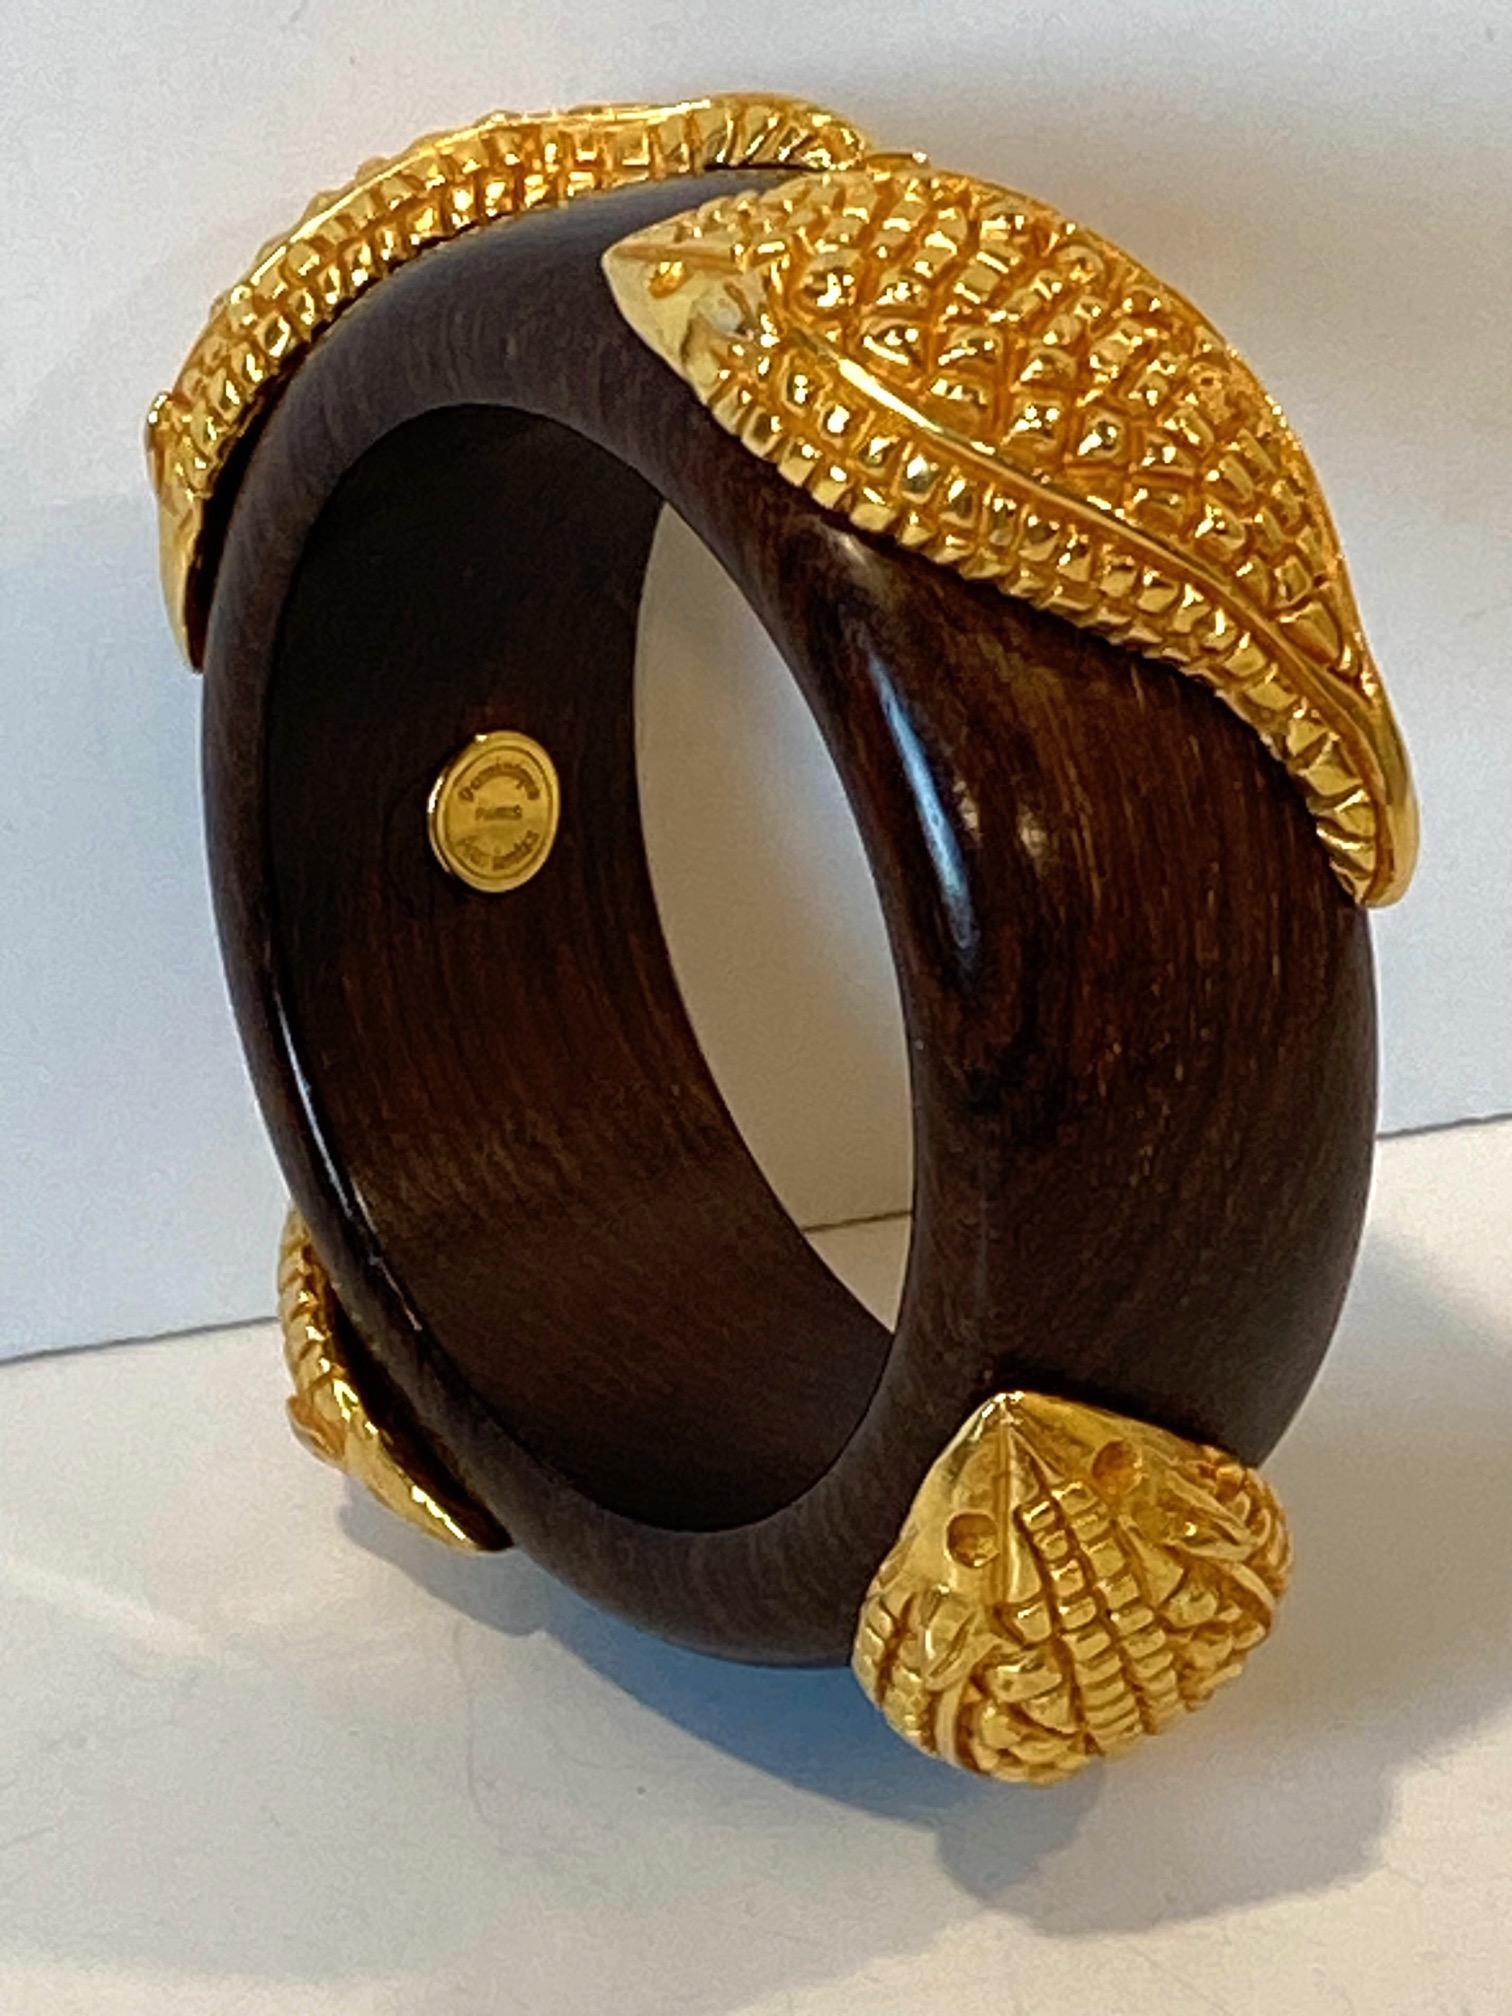 Featured is a wonderful 1980s wood and gilt bangle bracelet by French fashion designer Dominique Aurientis of Paris. She founded her namesake accessory and fashion jewelry brand in 1986. This bracelet is comprised of a 3.25 inch wide dark wood